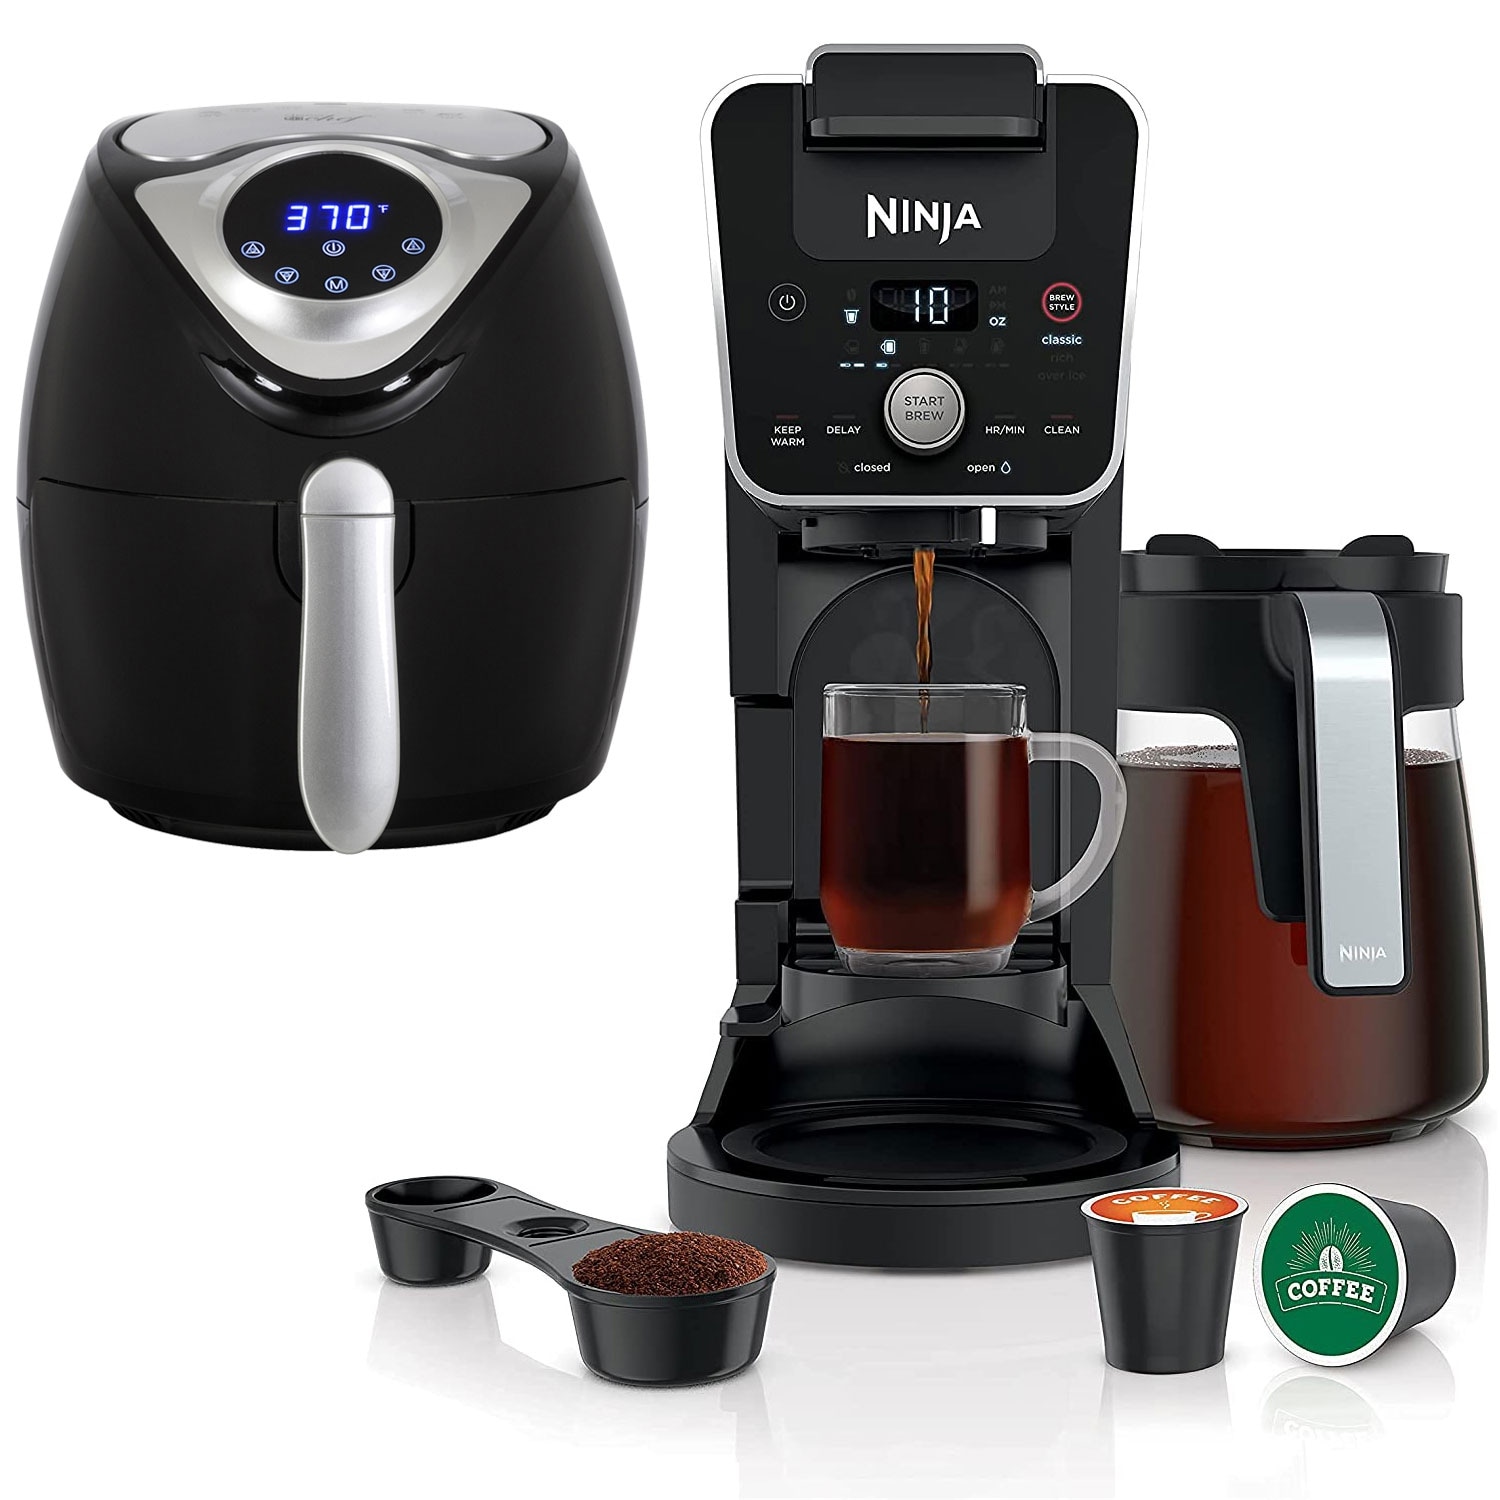 https://ak1.ostkcdn.com/images/products/is/images/direct/0a8027a9a5d68a014b3ab67c1b3ff728d603365f/Ninja-DualBrew-Single-Serve-Coffee-Maker-and-Bonus-Deco-Chef-Air-Fryer.jpg